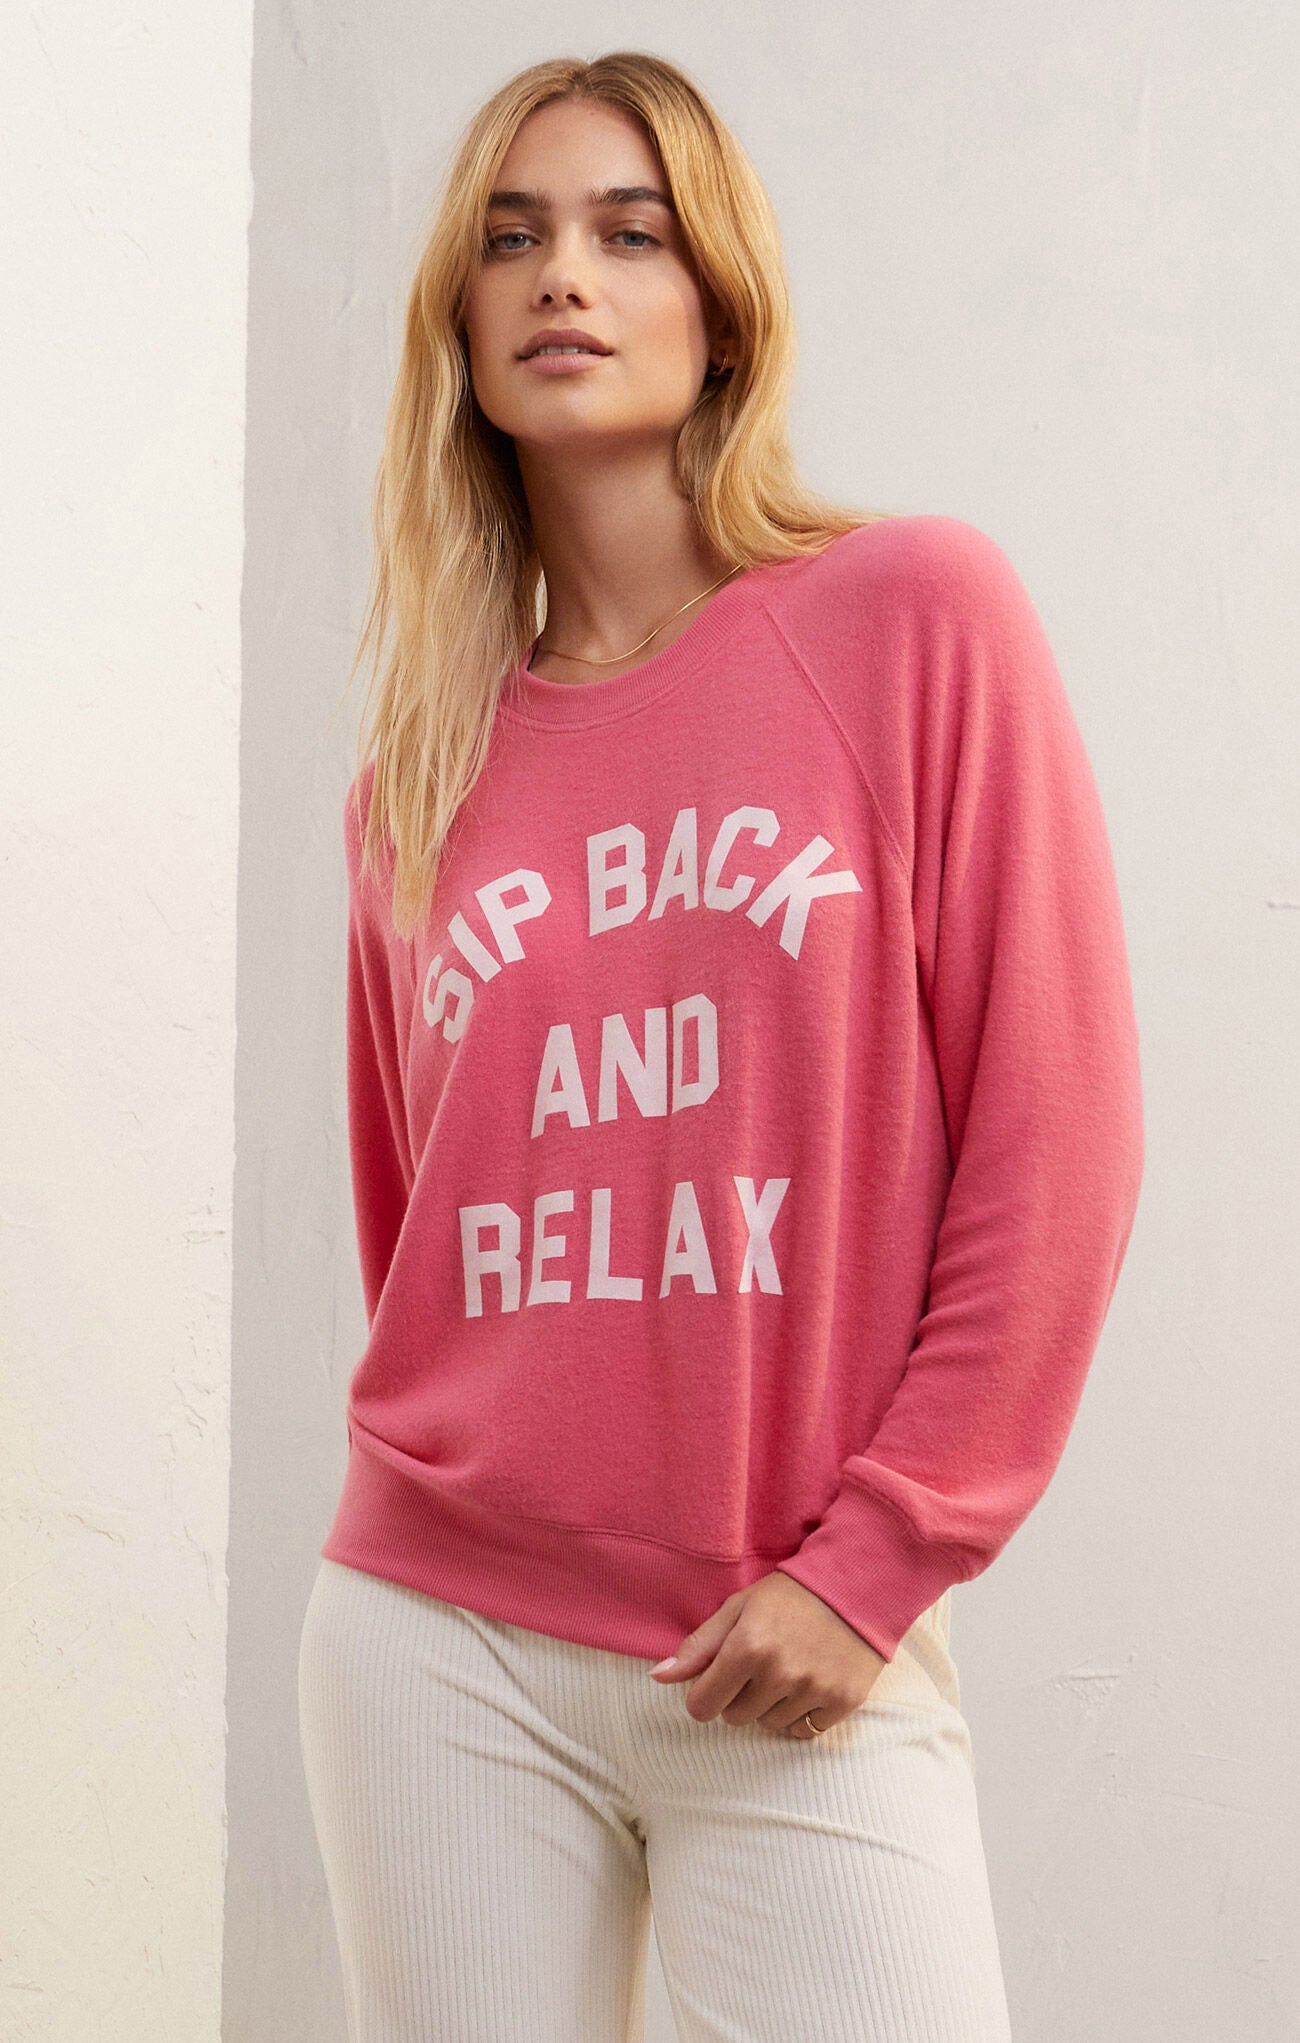 Sip Back and Relax Long Sleeve Top Pink